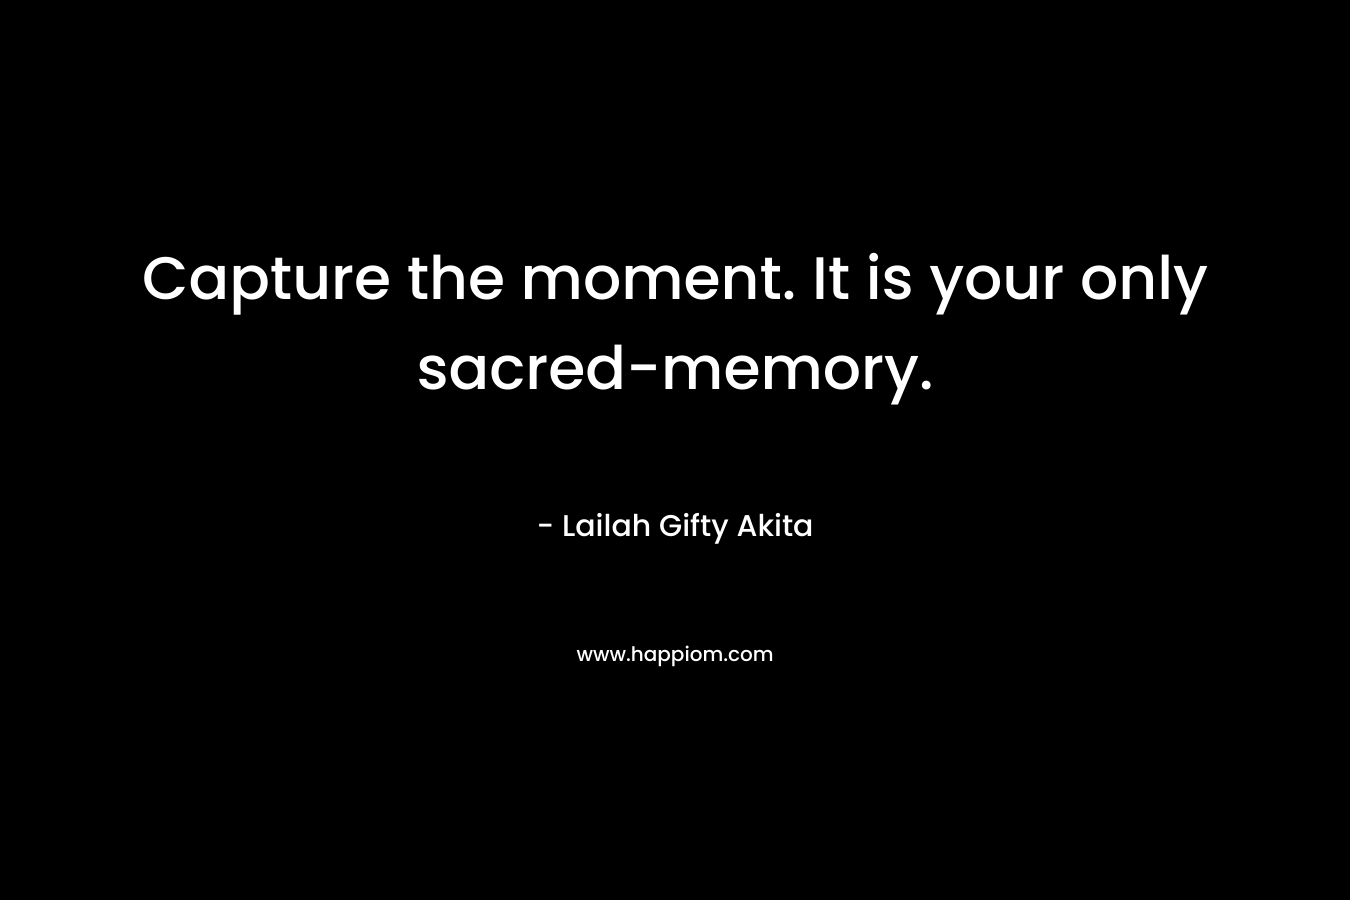 Capture the moment. It is your only sacred-memory.